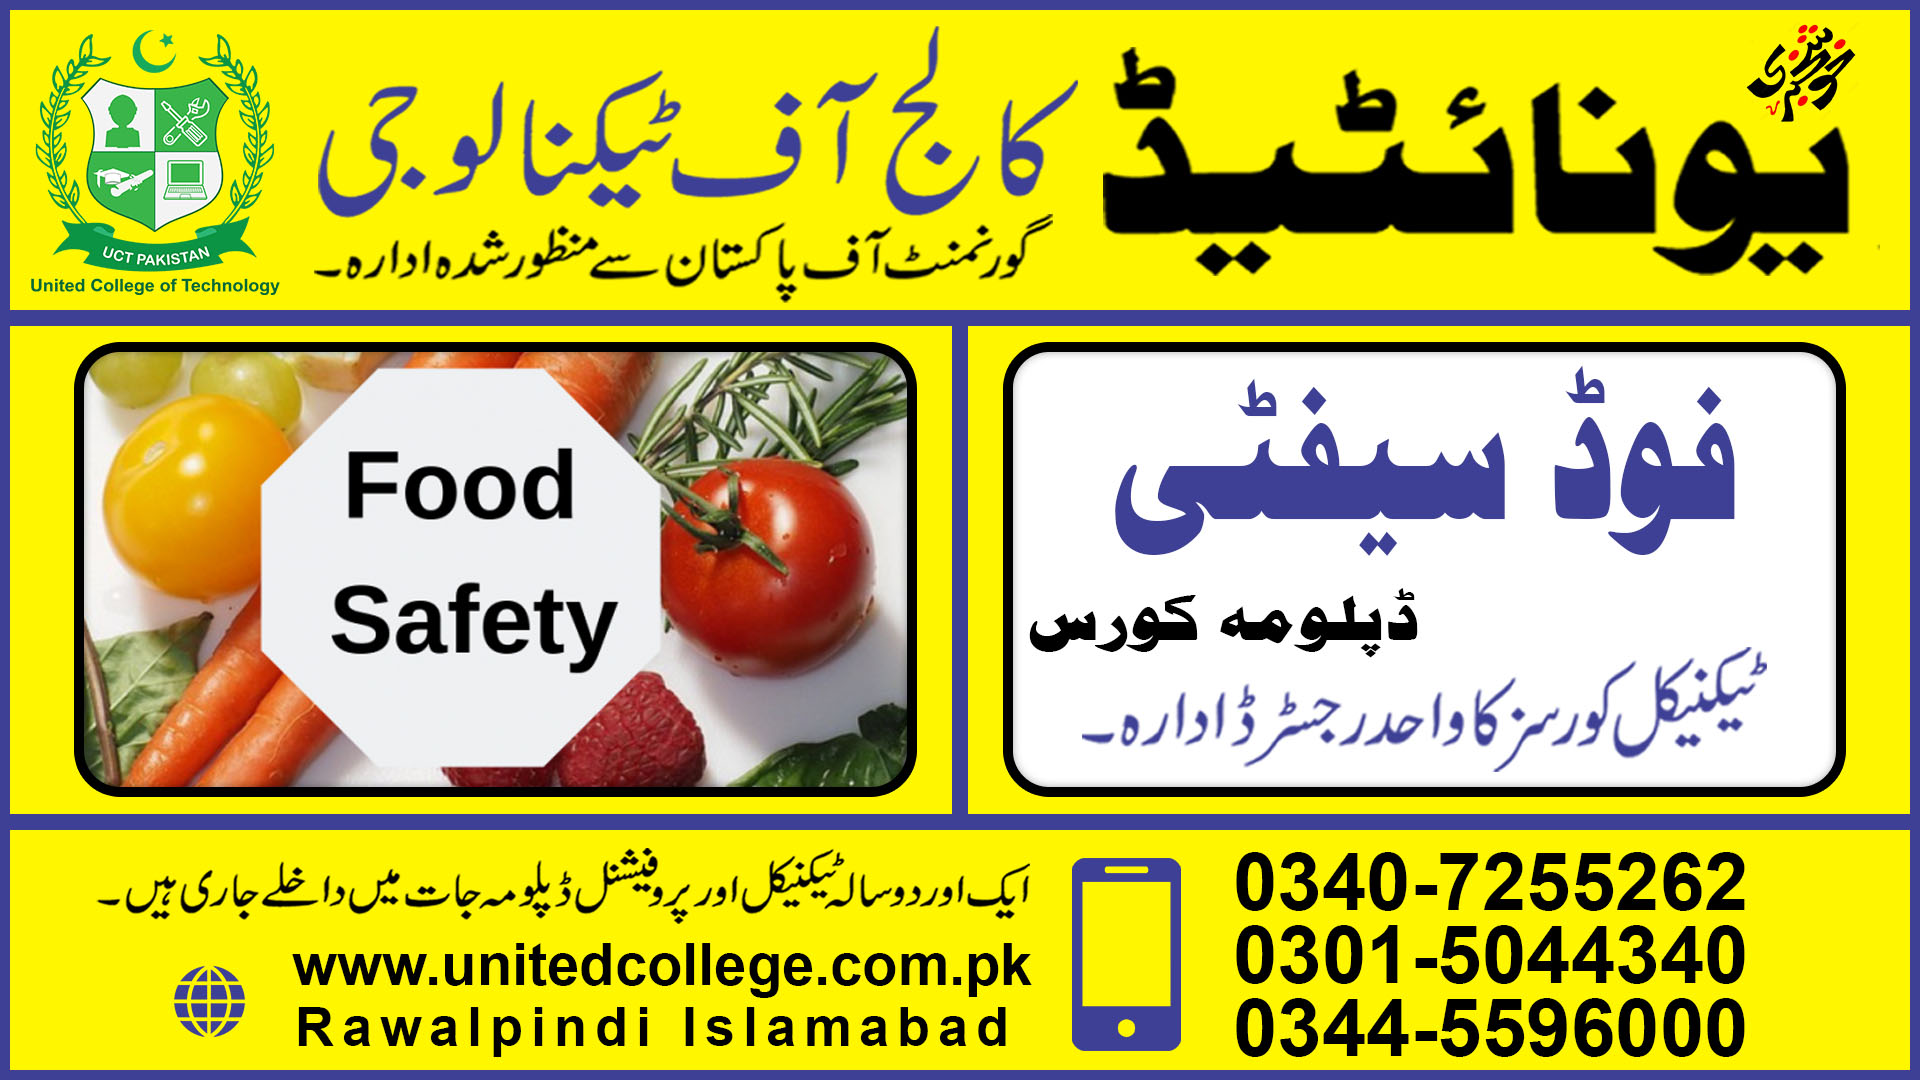 FOOD SAFETY COURSE